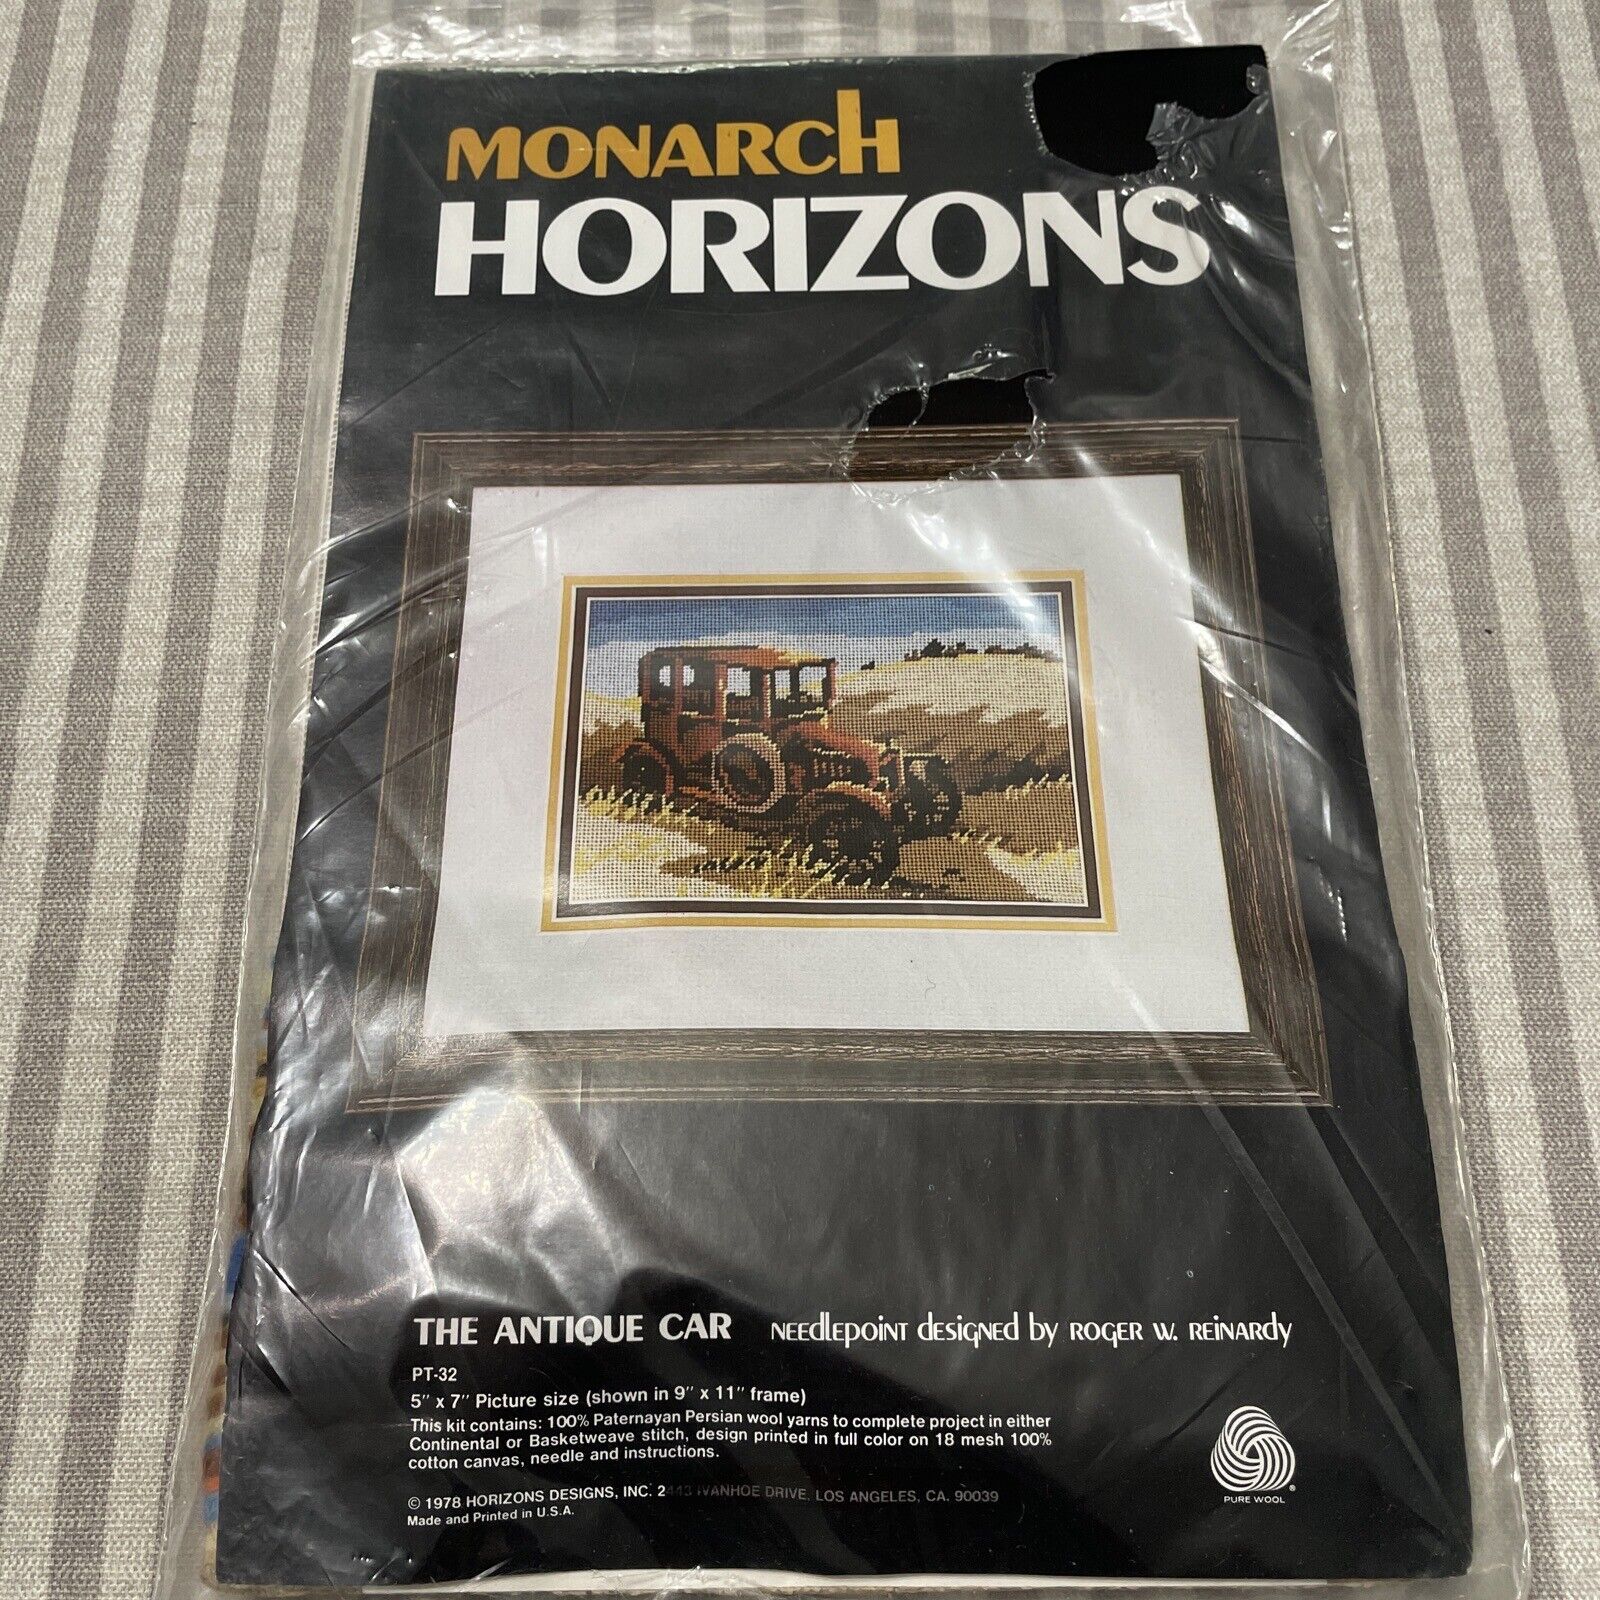 Vtg MONARCH HORIZONS The Antique Car Needlepoint Kit Persian Wool / NOS 1978 - $8.55